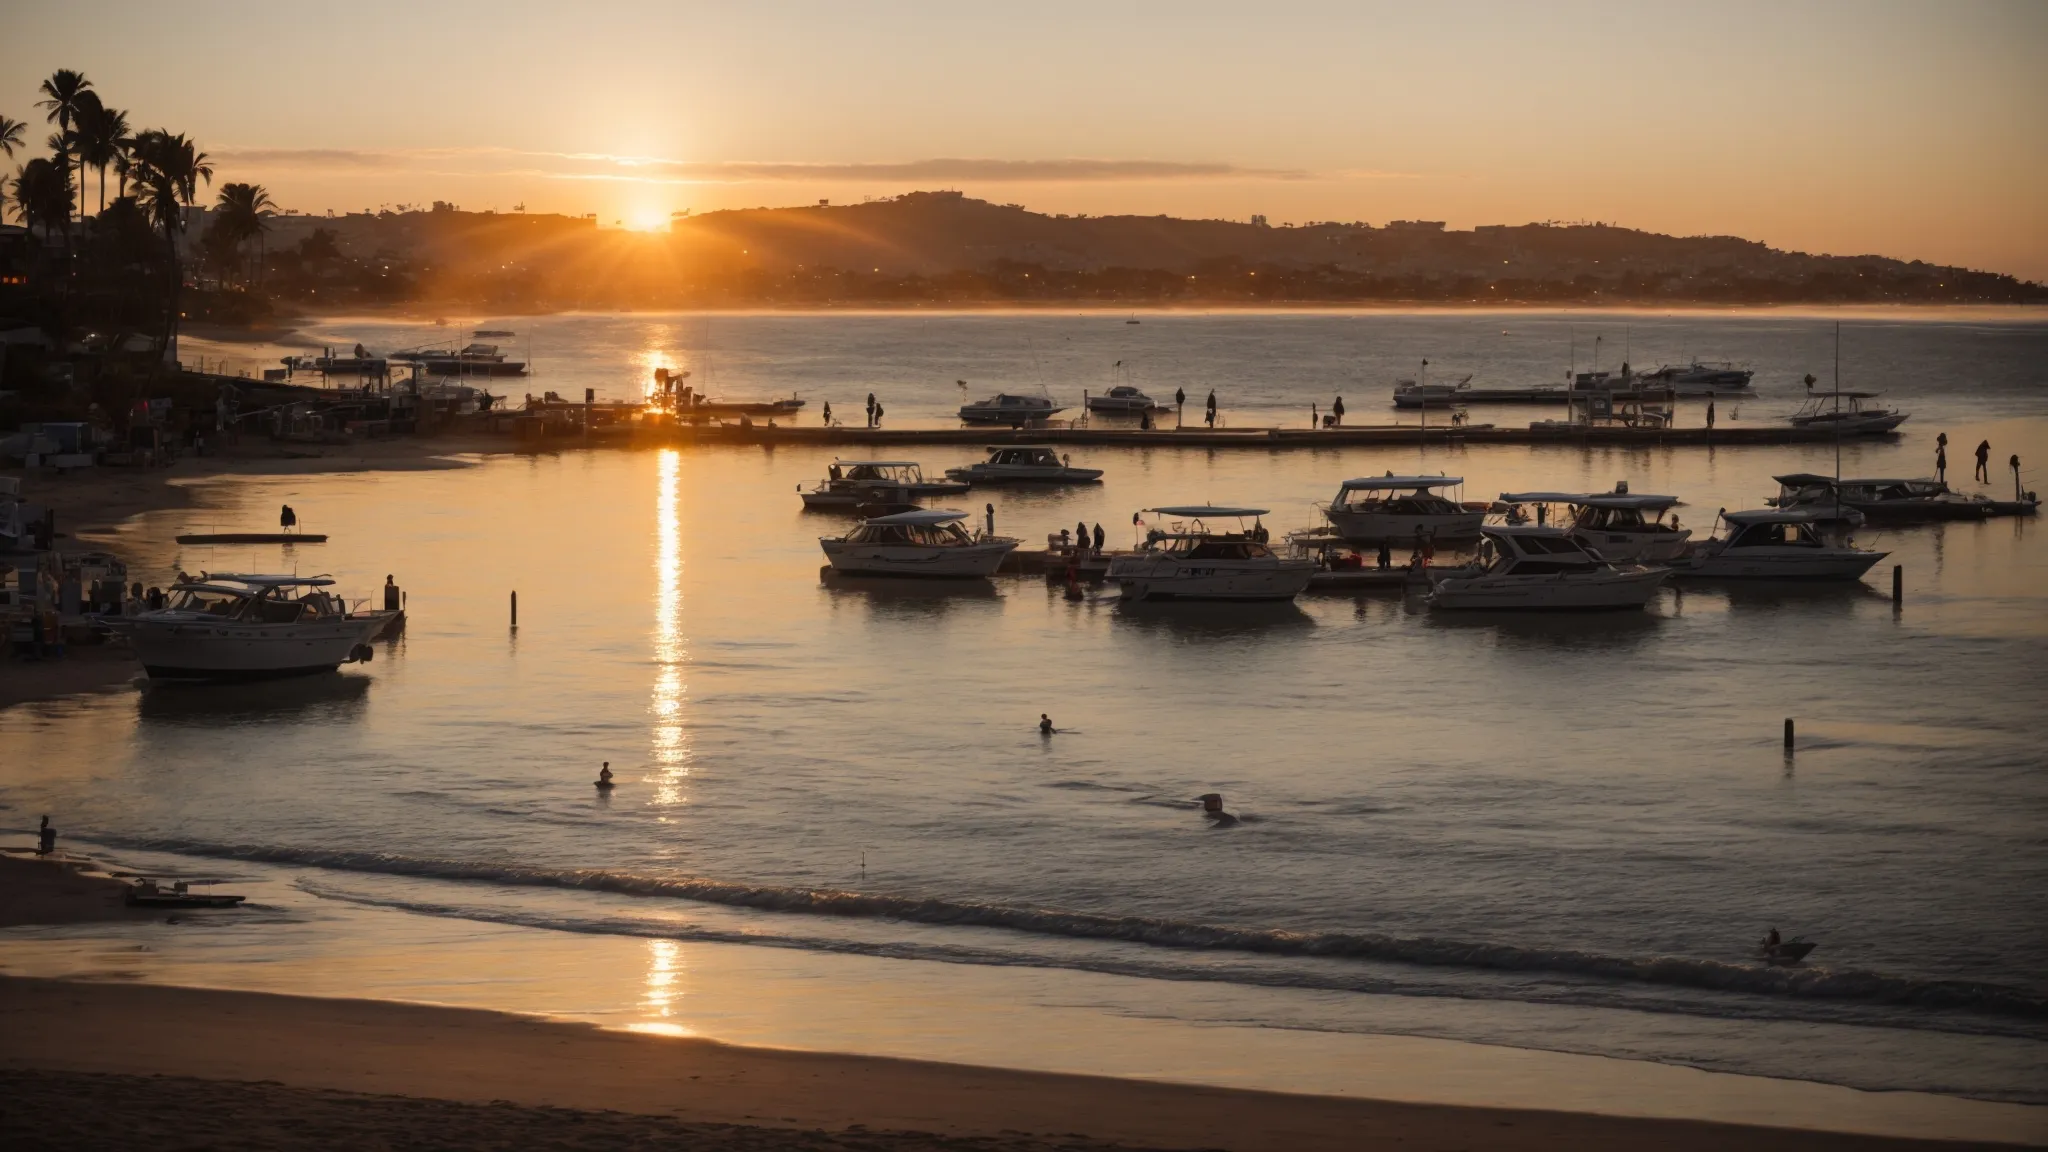 sunset over the sparkling water of mission bay, with rvs parked close to the shore and families enjoying a bonfire on the beach.